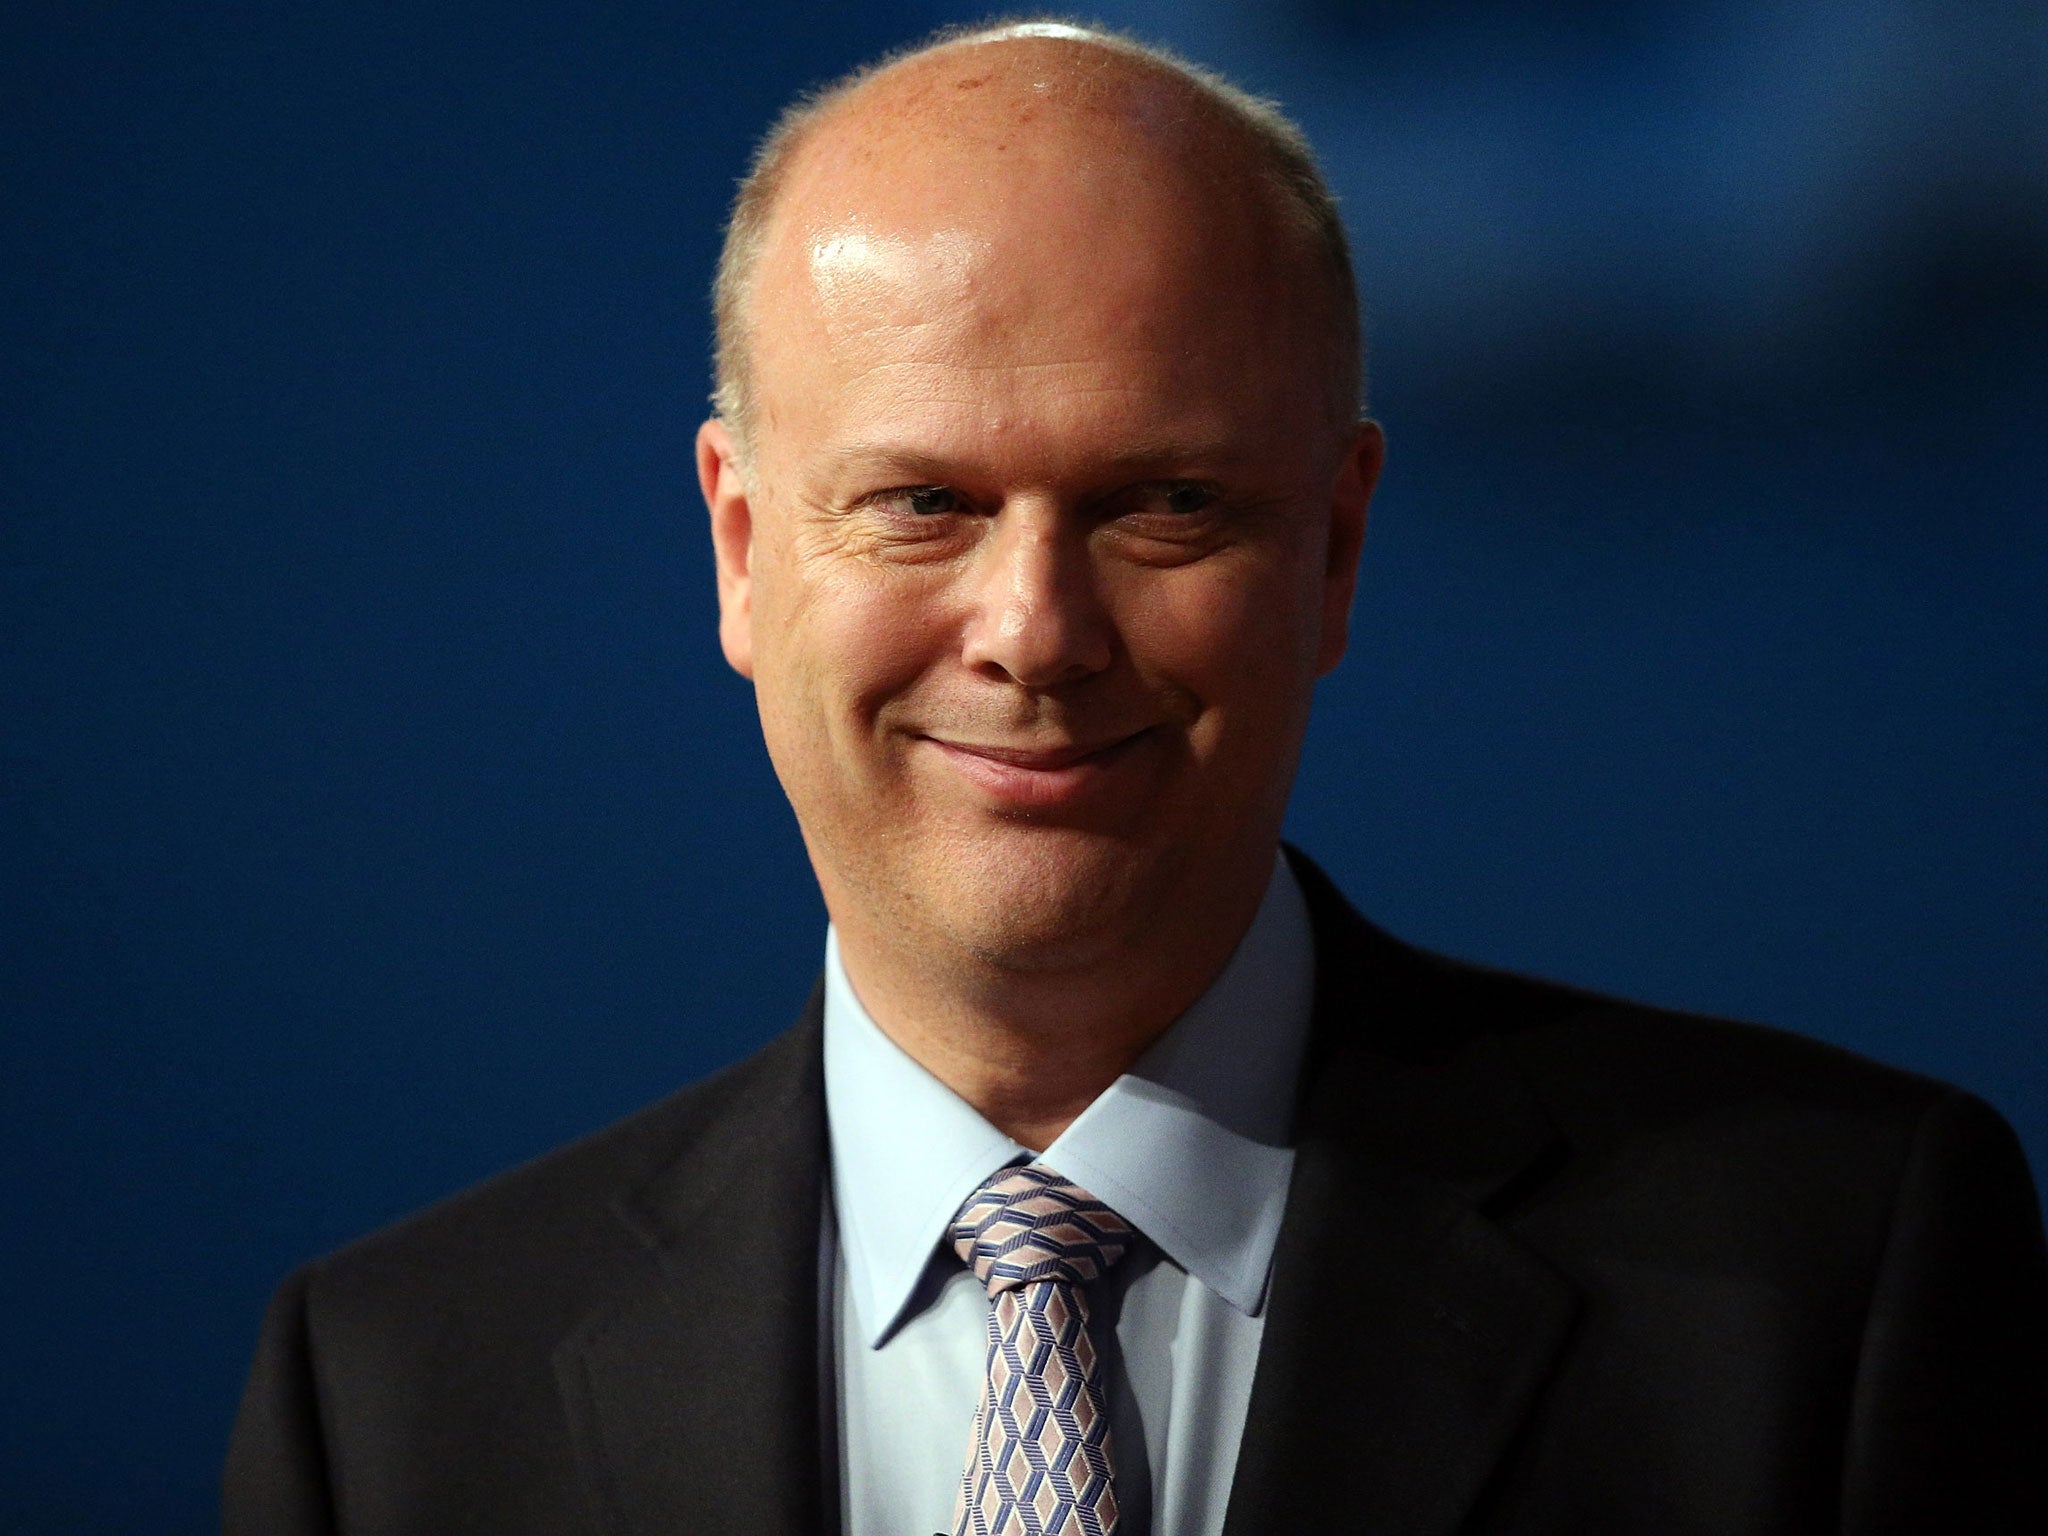 Justice secretary Chris Grayling speaks at the Conservative party conference in the International Convention Centre on October 9, 2012 in Birmingham, England.